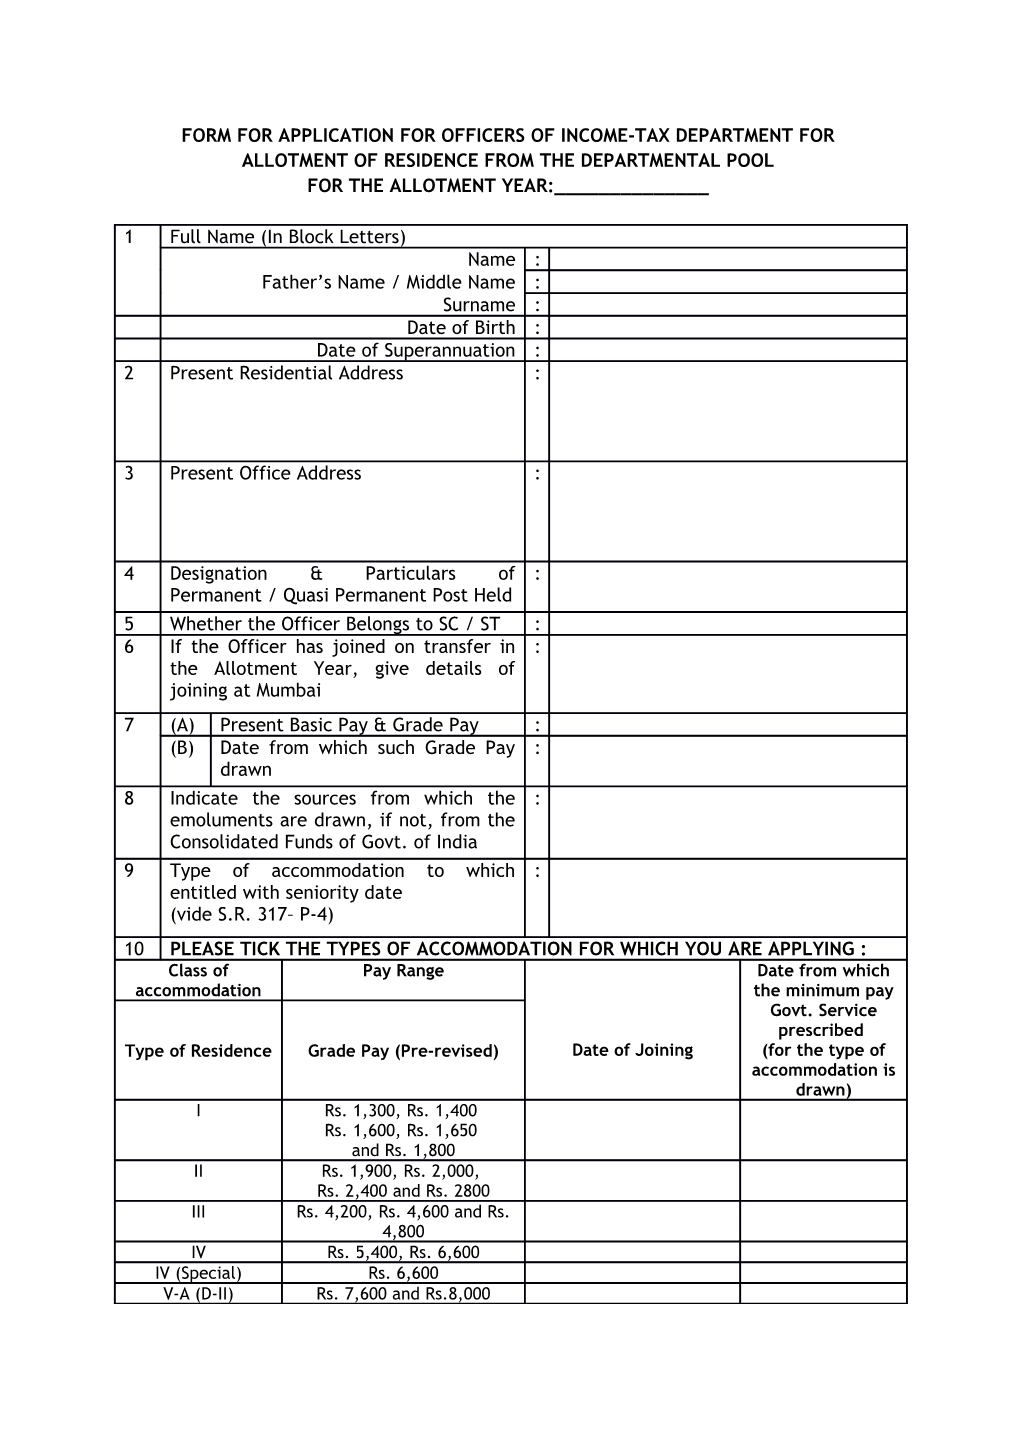 Form for Application for Officers of Income-Tax Department For